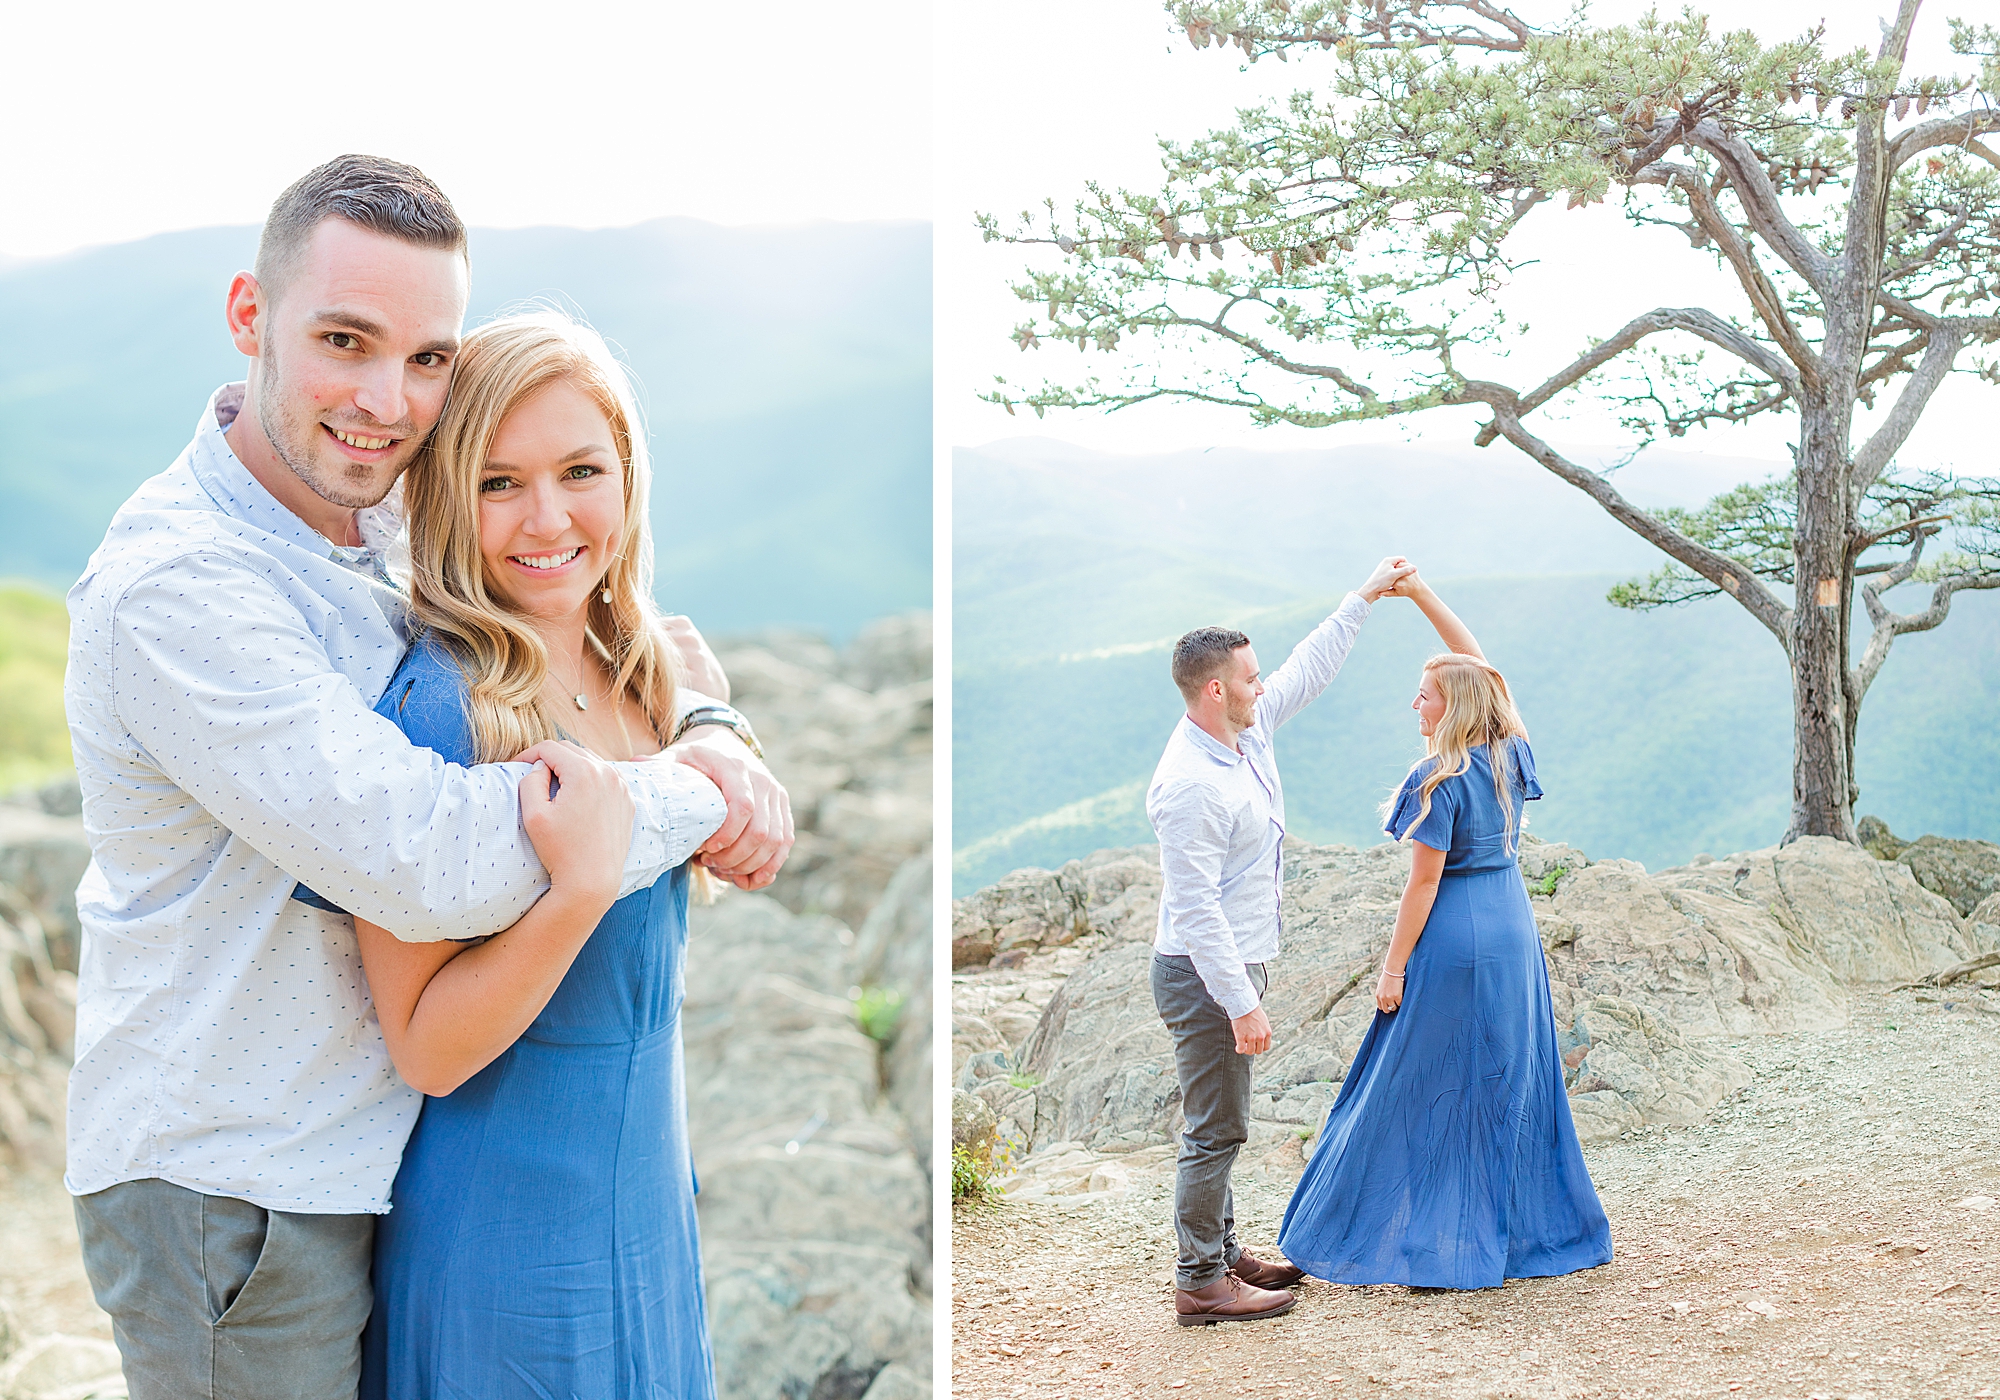 Engagement photos at Ravens Roost.